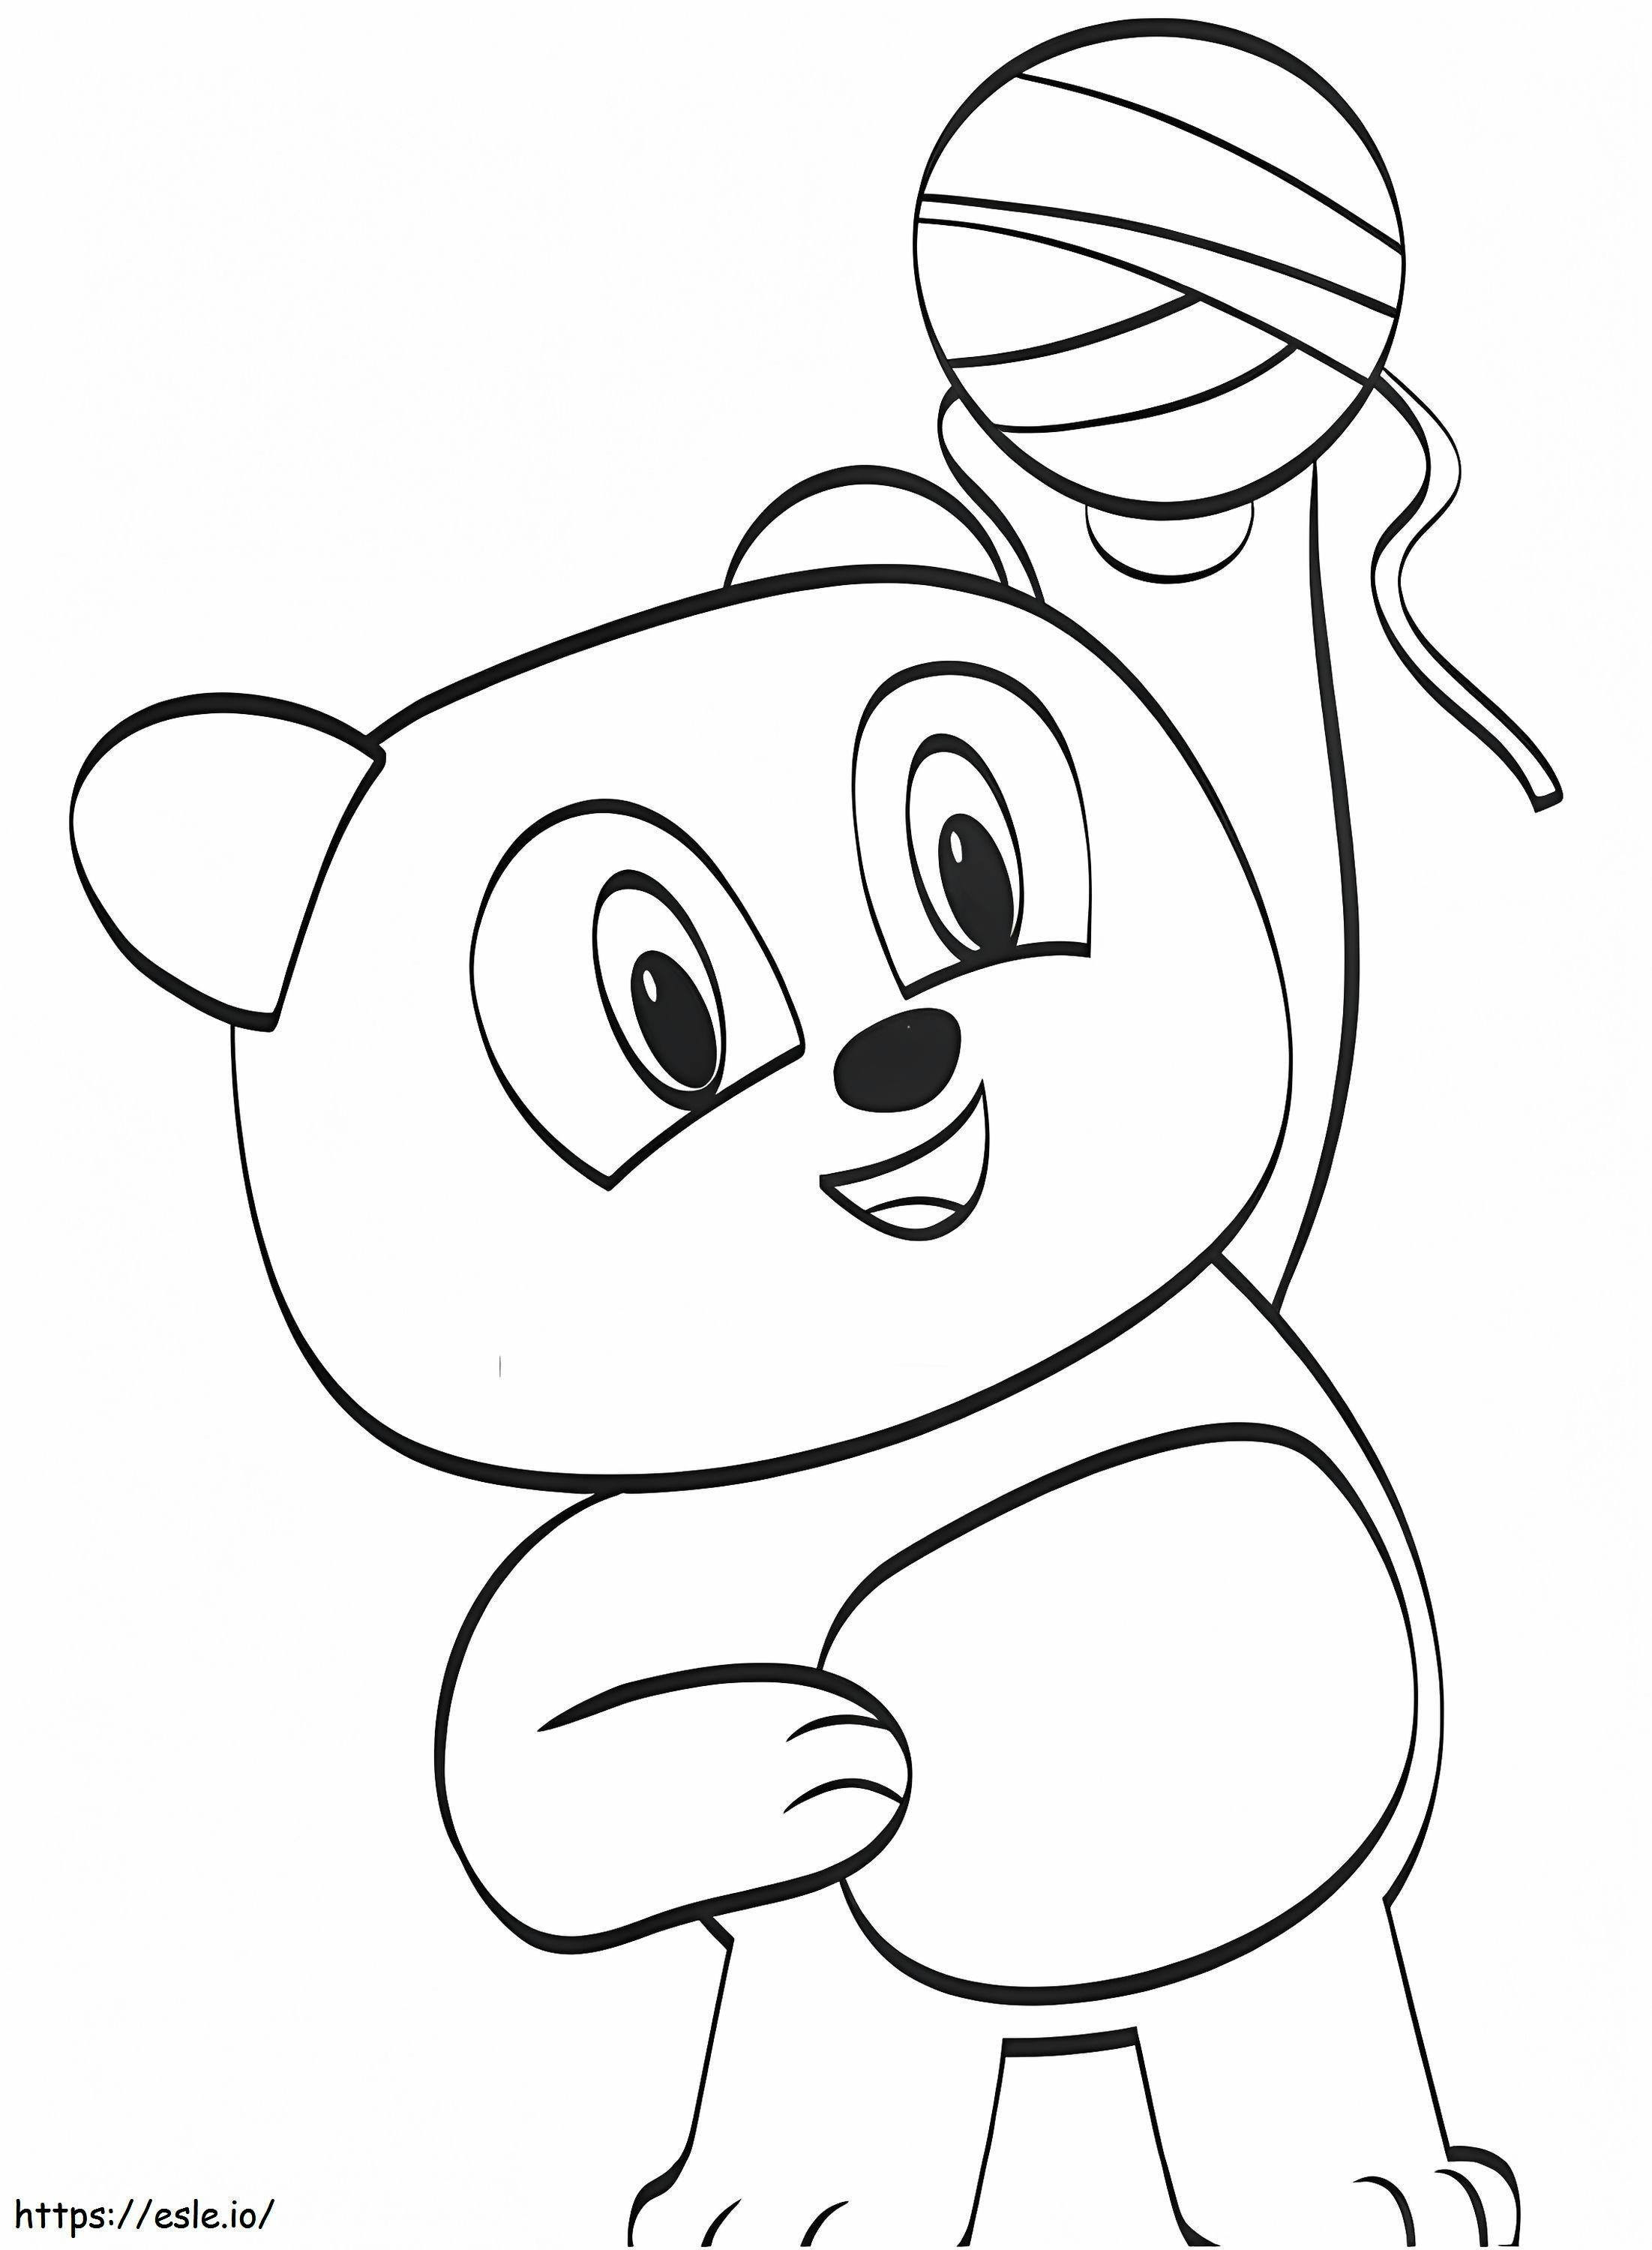 1534817944 Ping With Wool Roll A4 coloring page